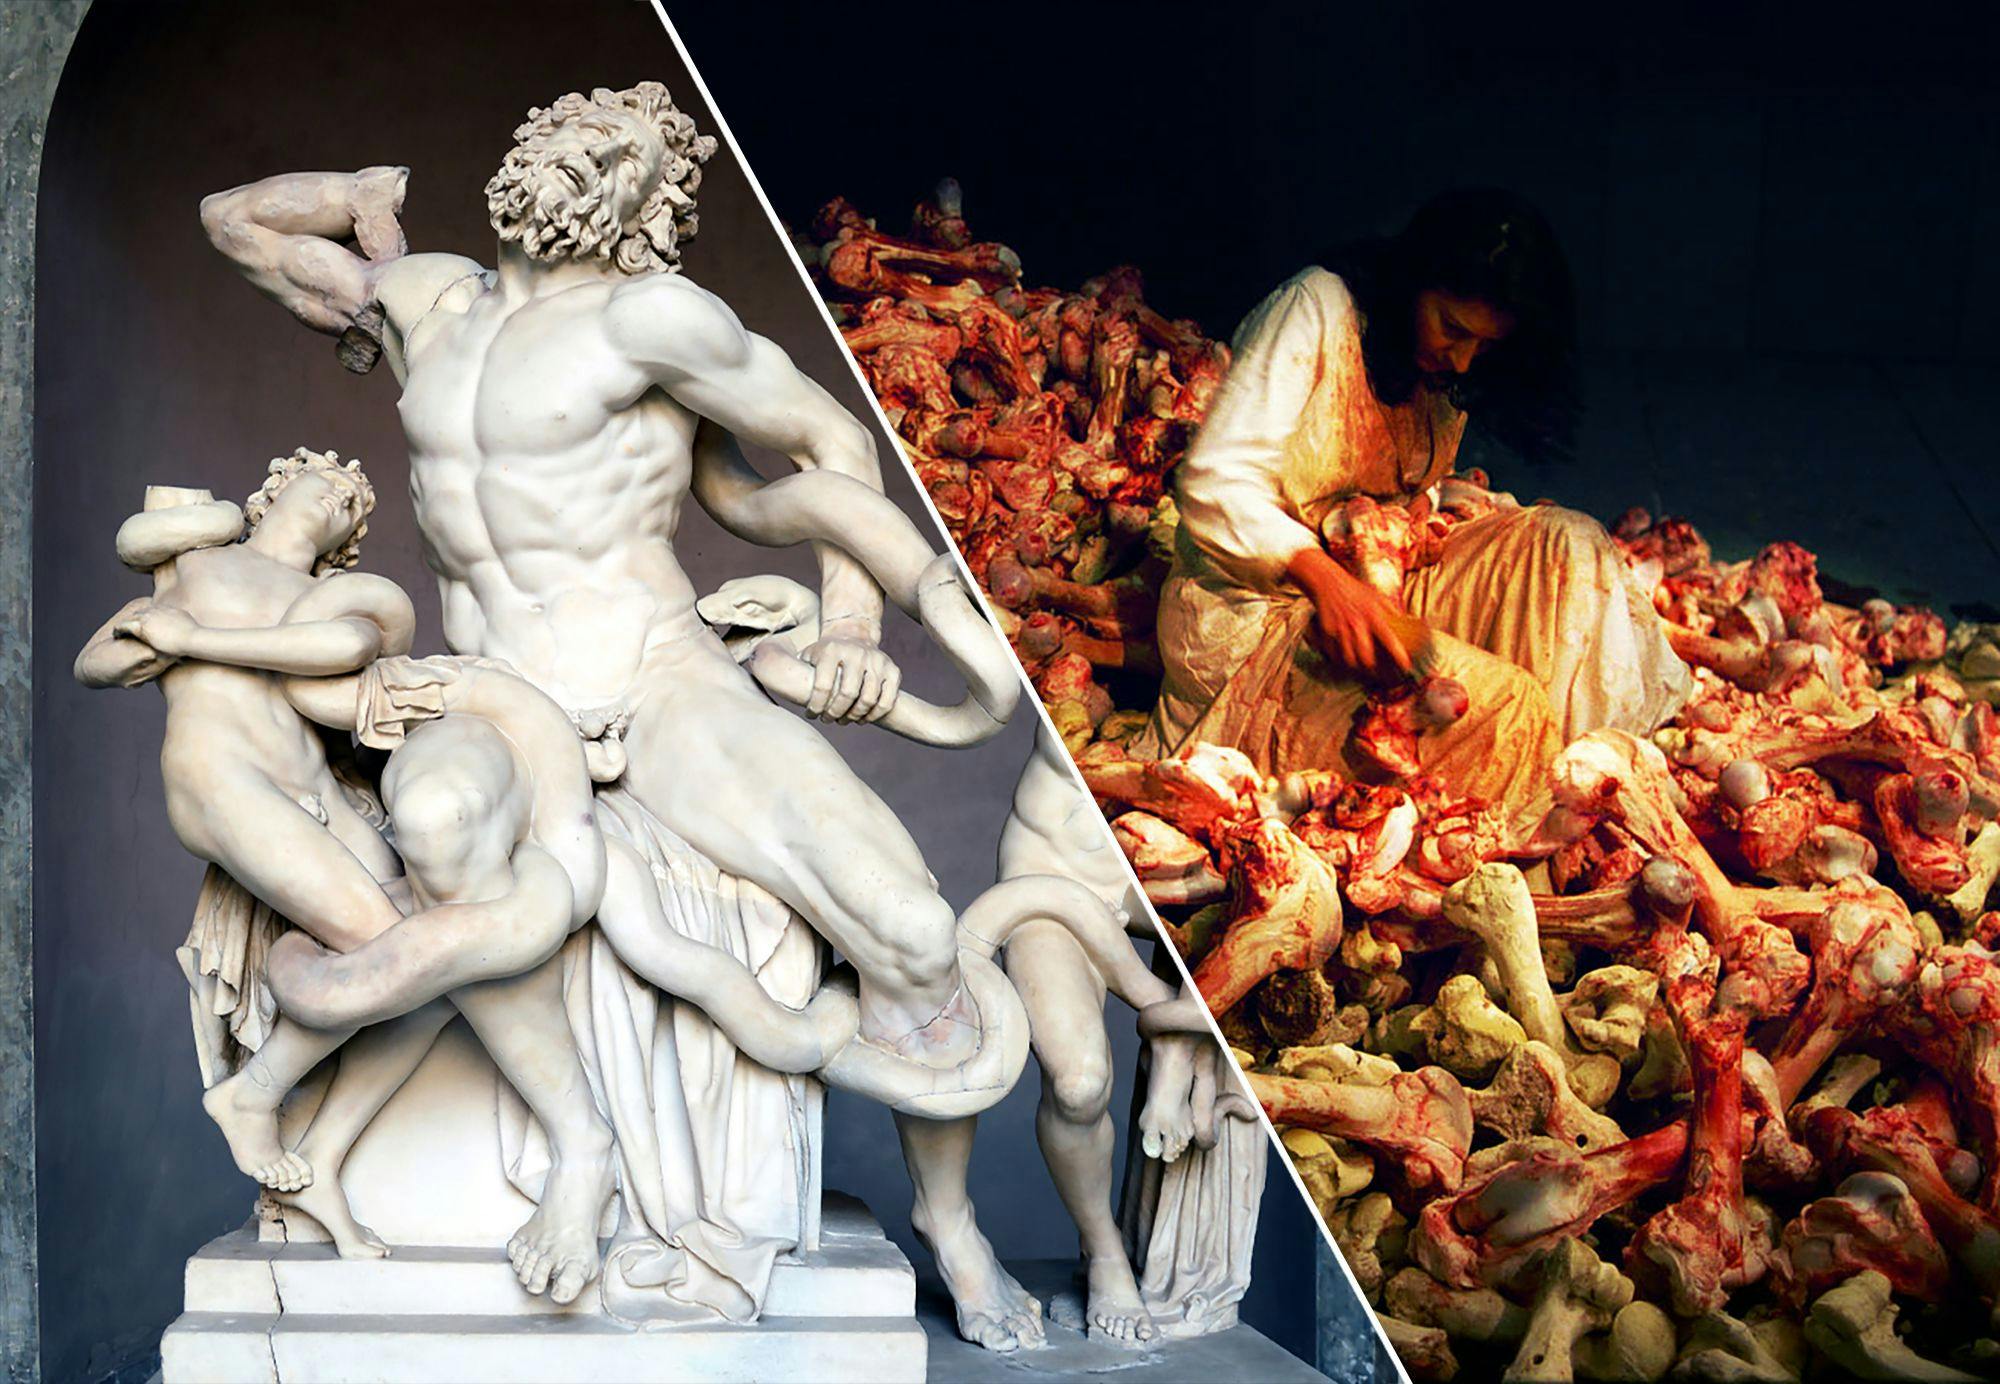 Two different works of art: the marble sculpture The Laocoön Group and photo from the performance work "Balkan Baroque" 1997 by Marina Abramovic